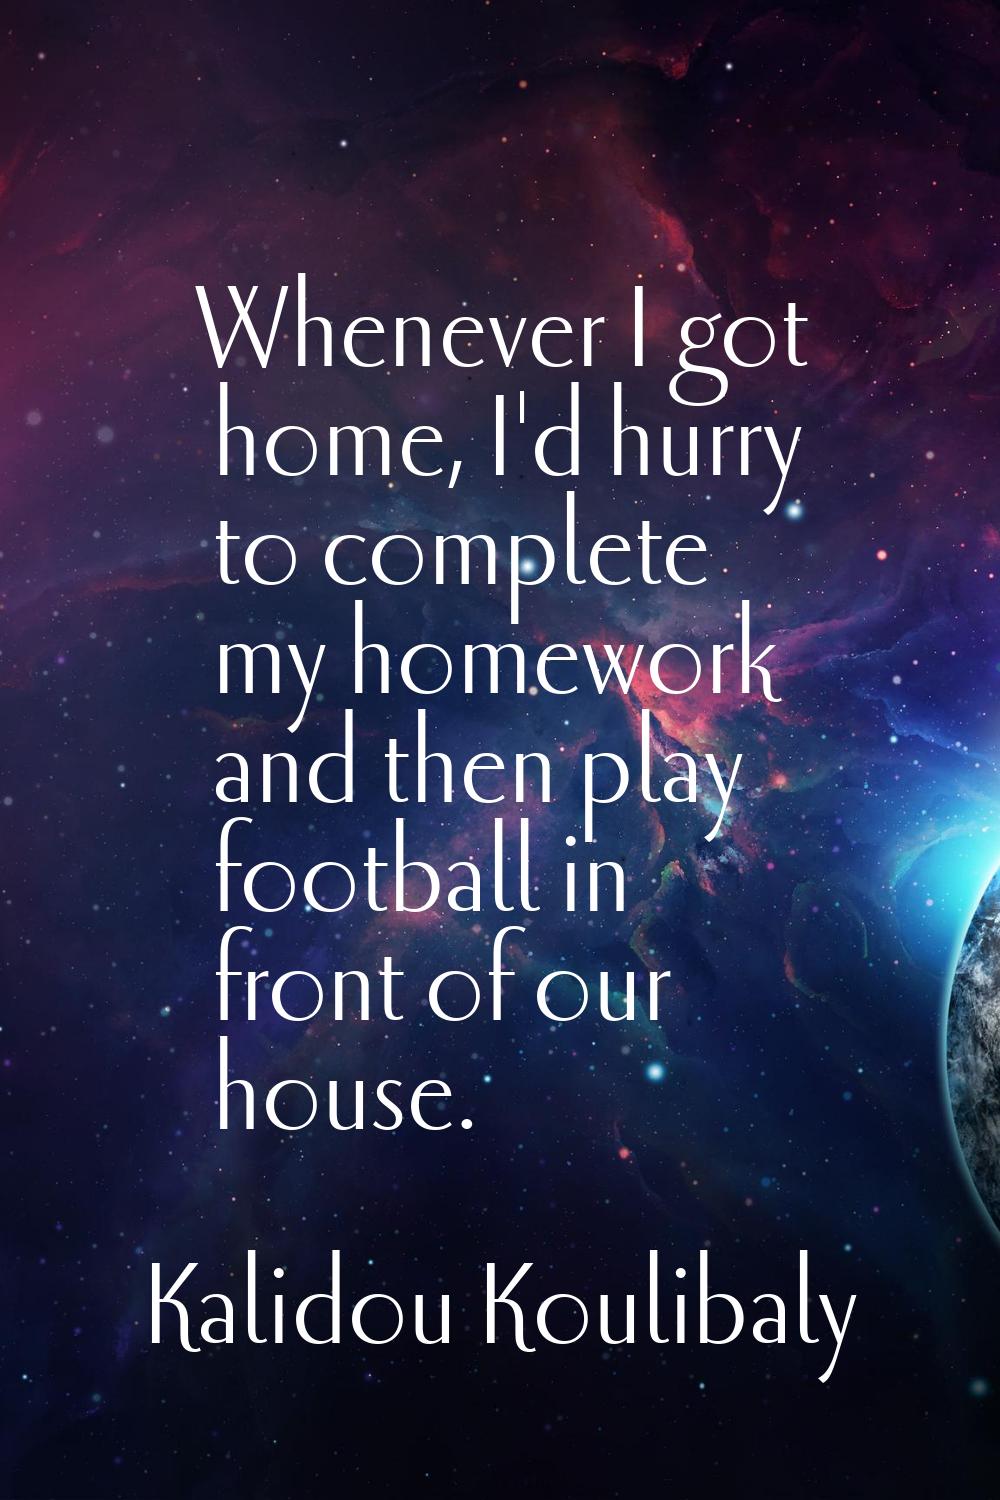 Whenever I got home, I'd hurry to complete my homework and then play football in front of our house